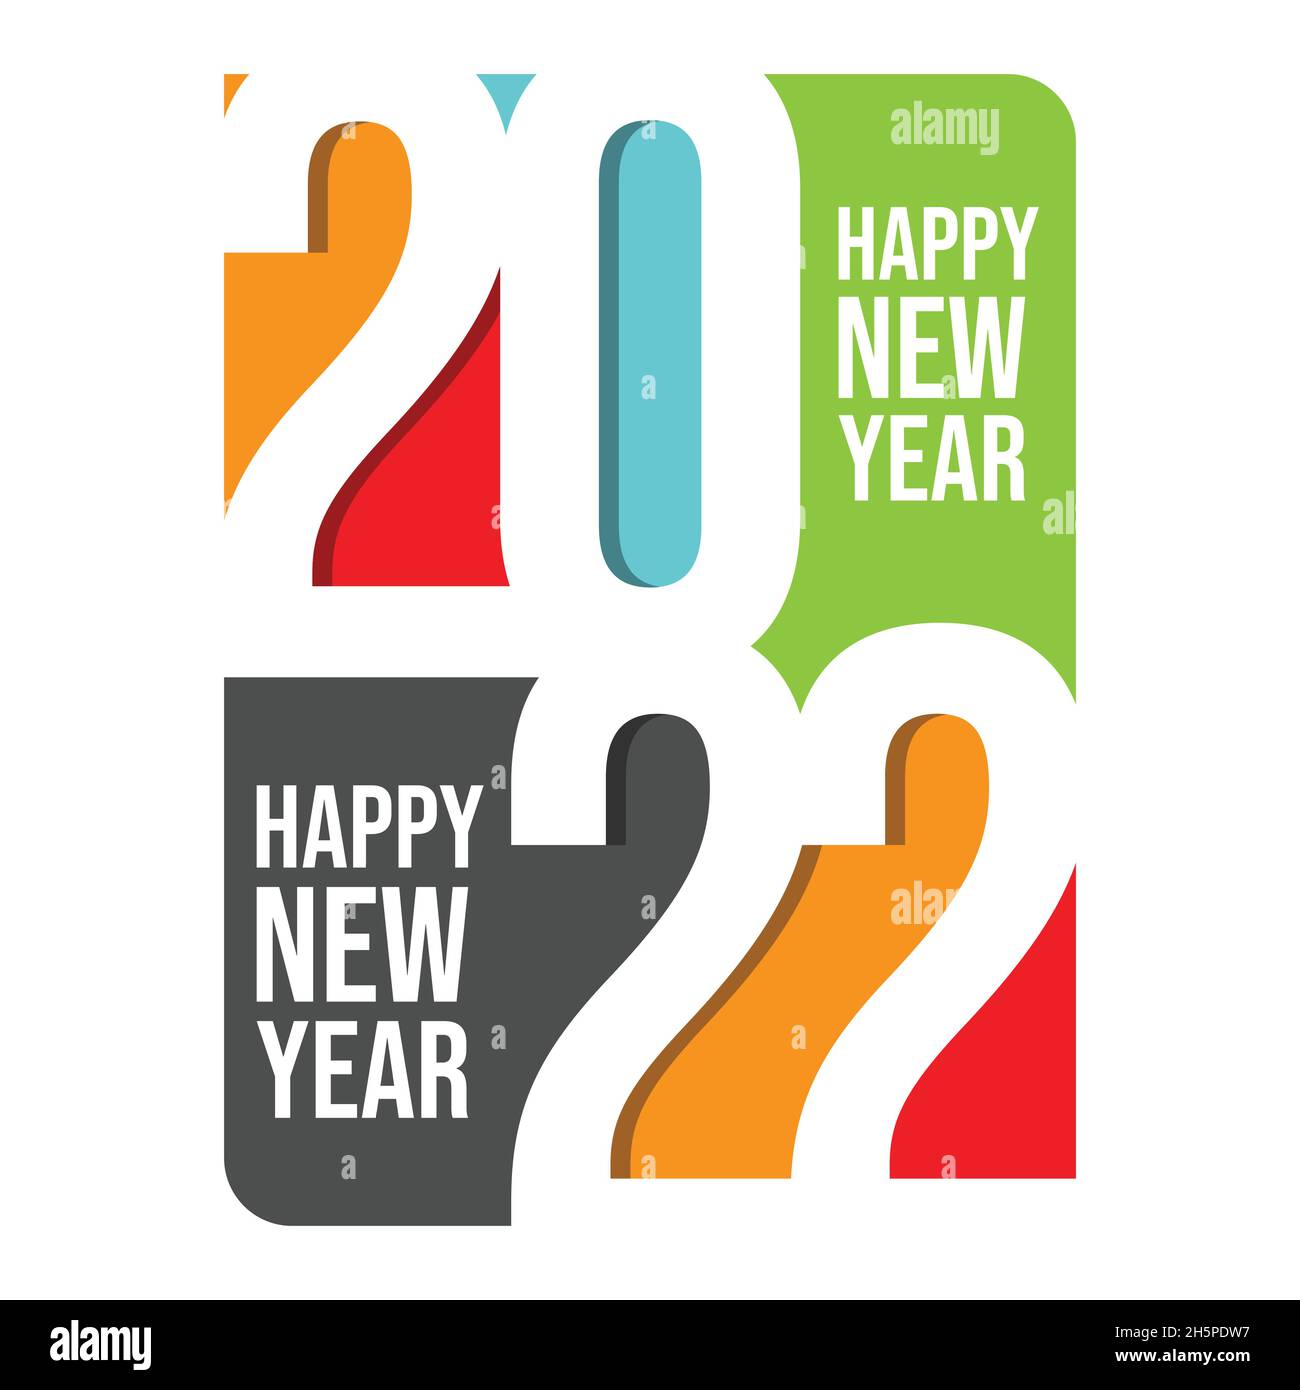 Happy new year 2022 greeting vector. Happy new year 2022 background vector image Stock Vector